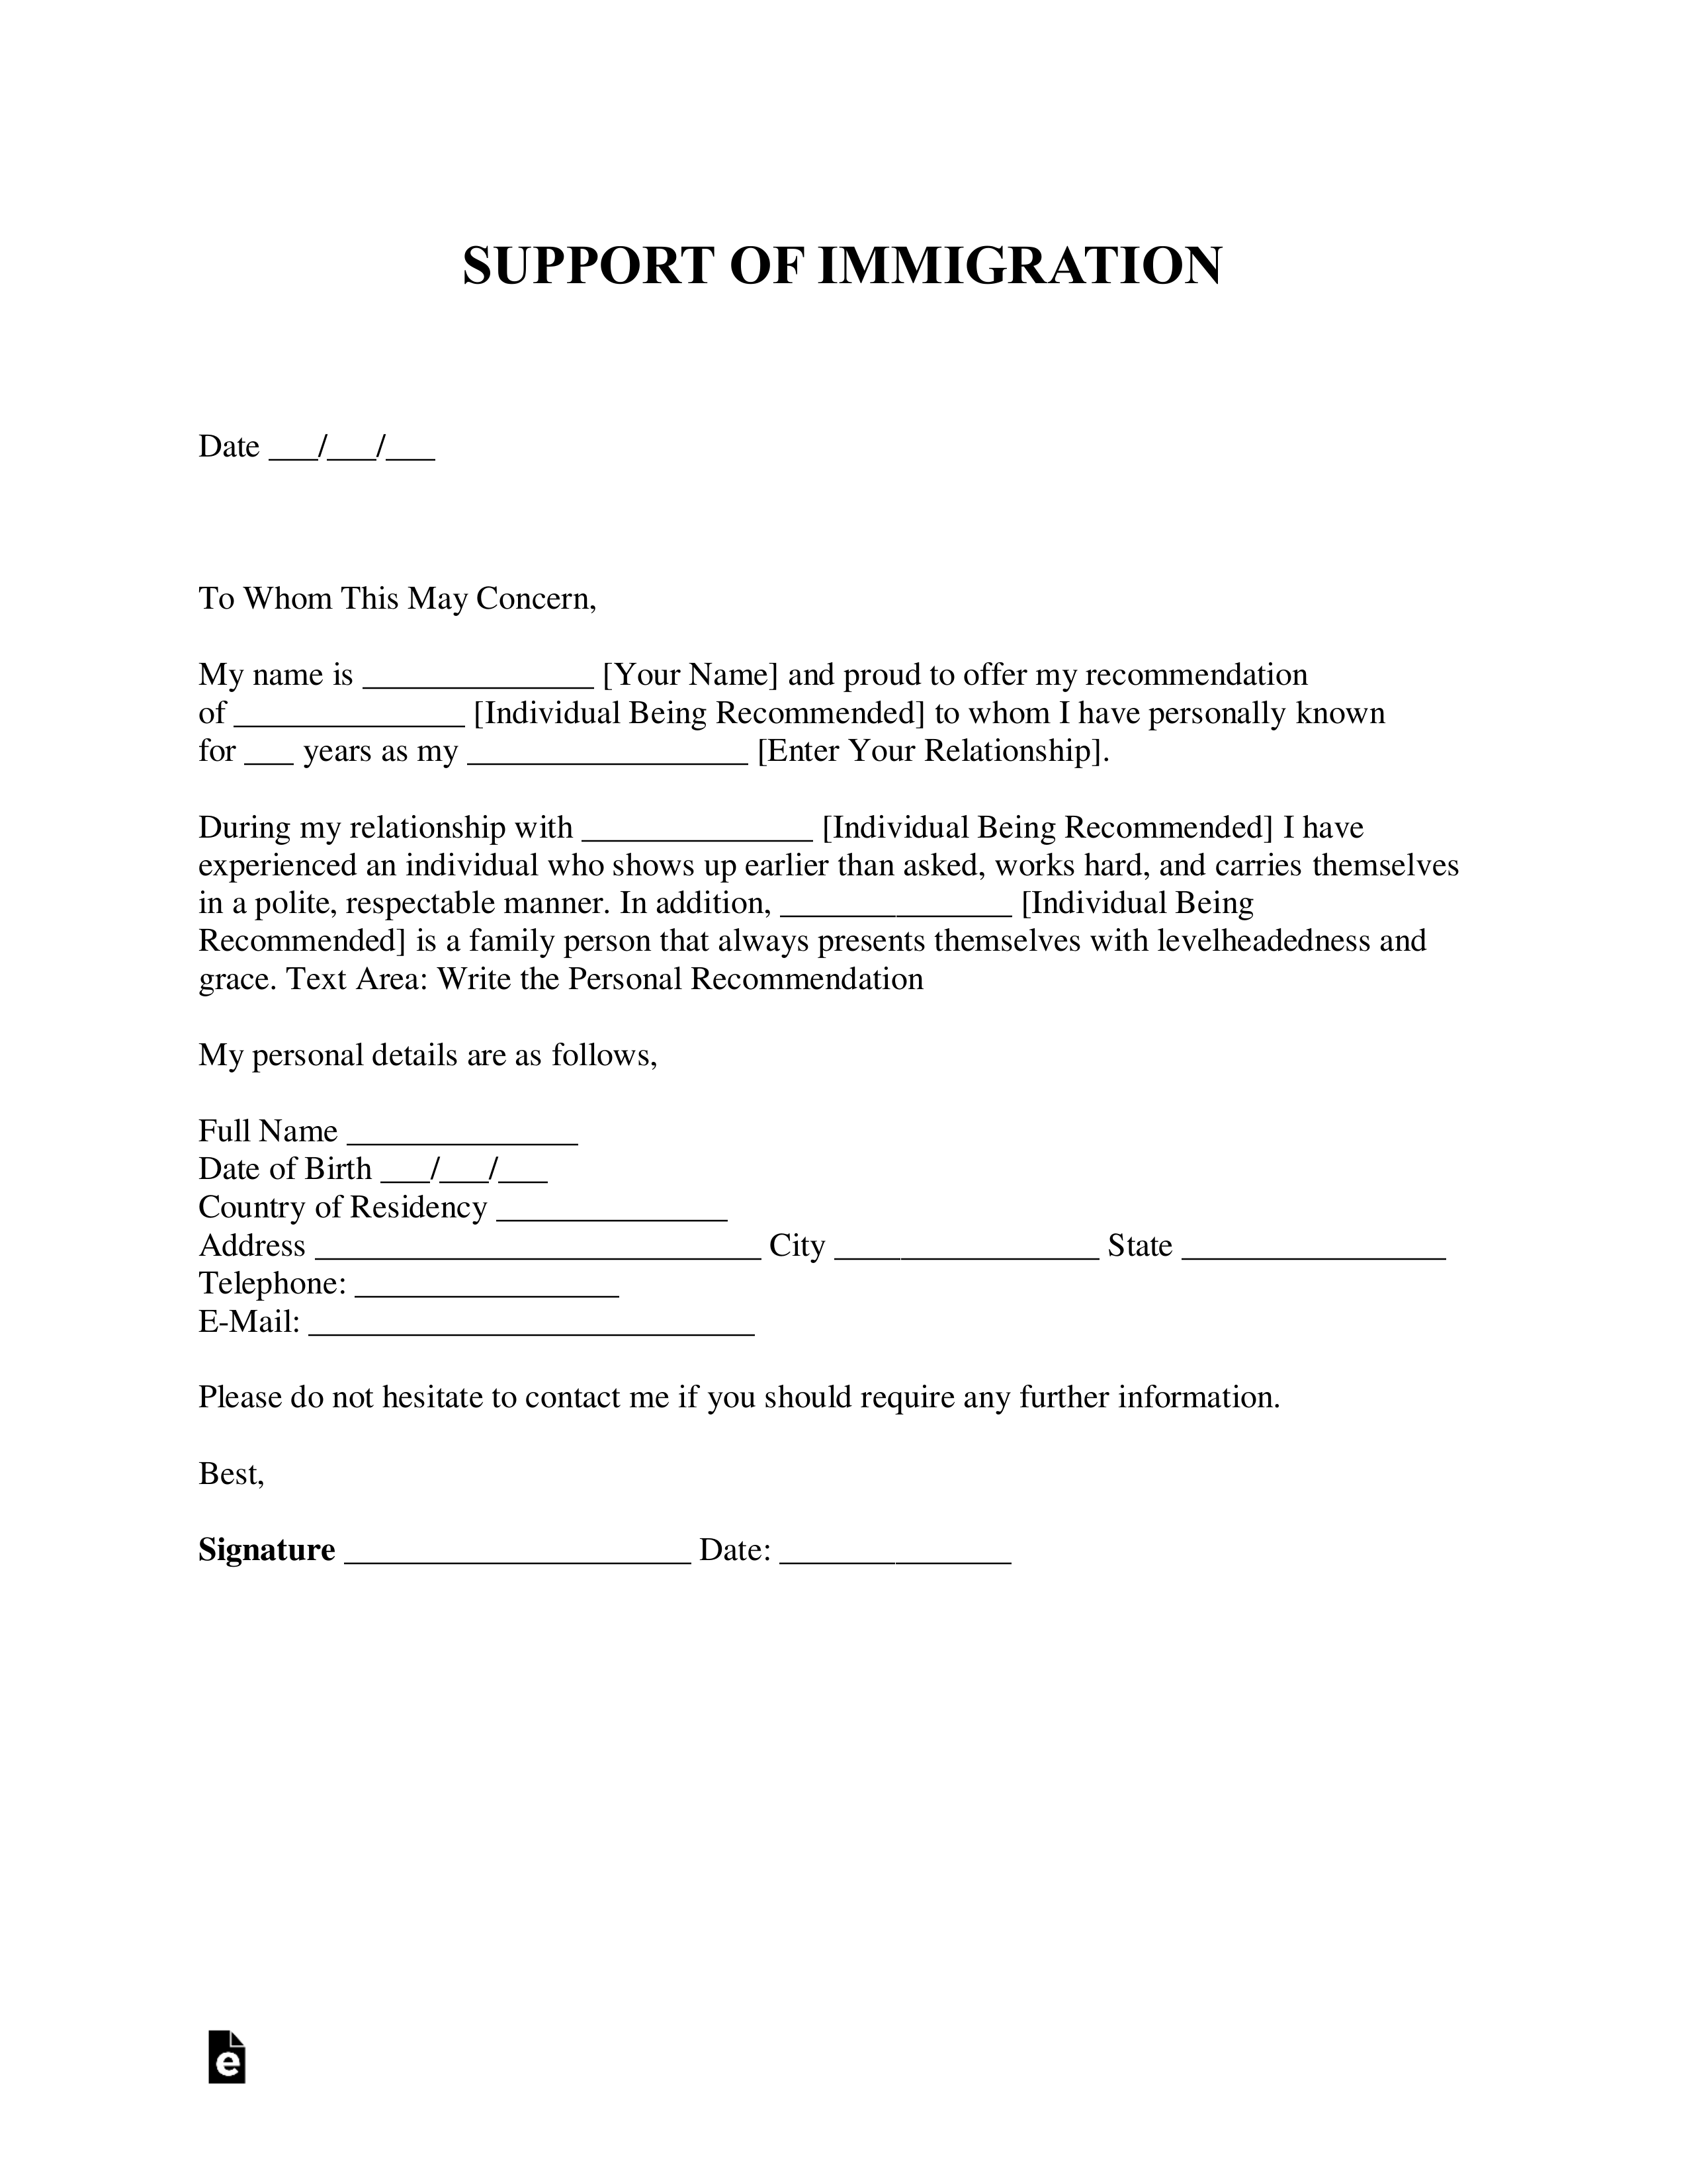 Support Letter Sample For Immigration from eforms.com